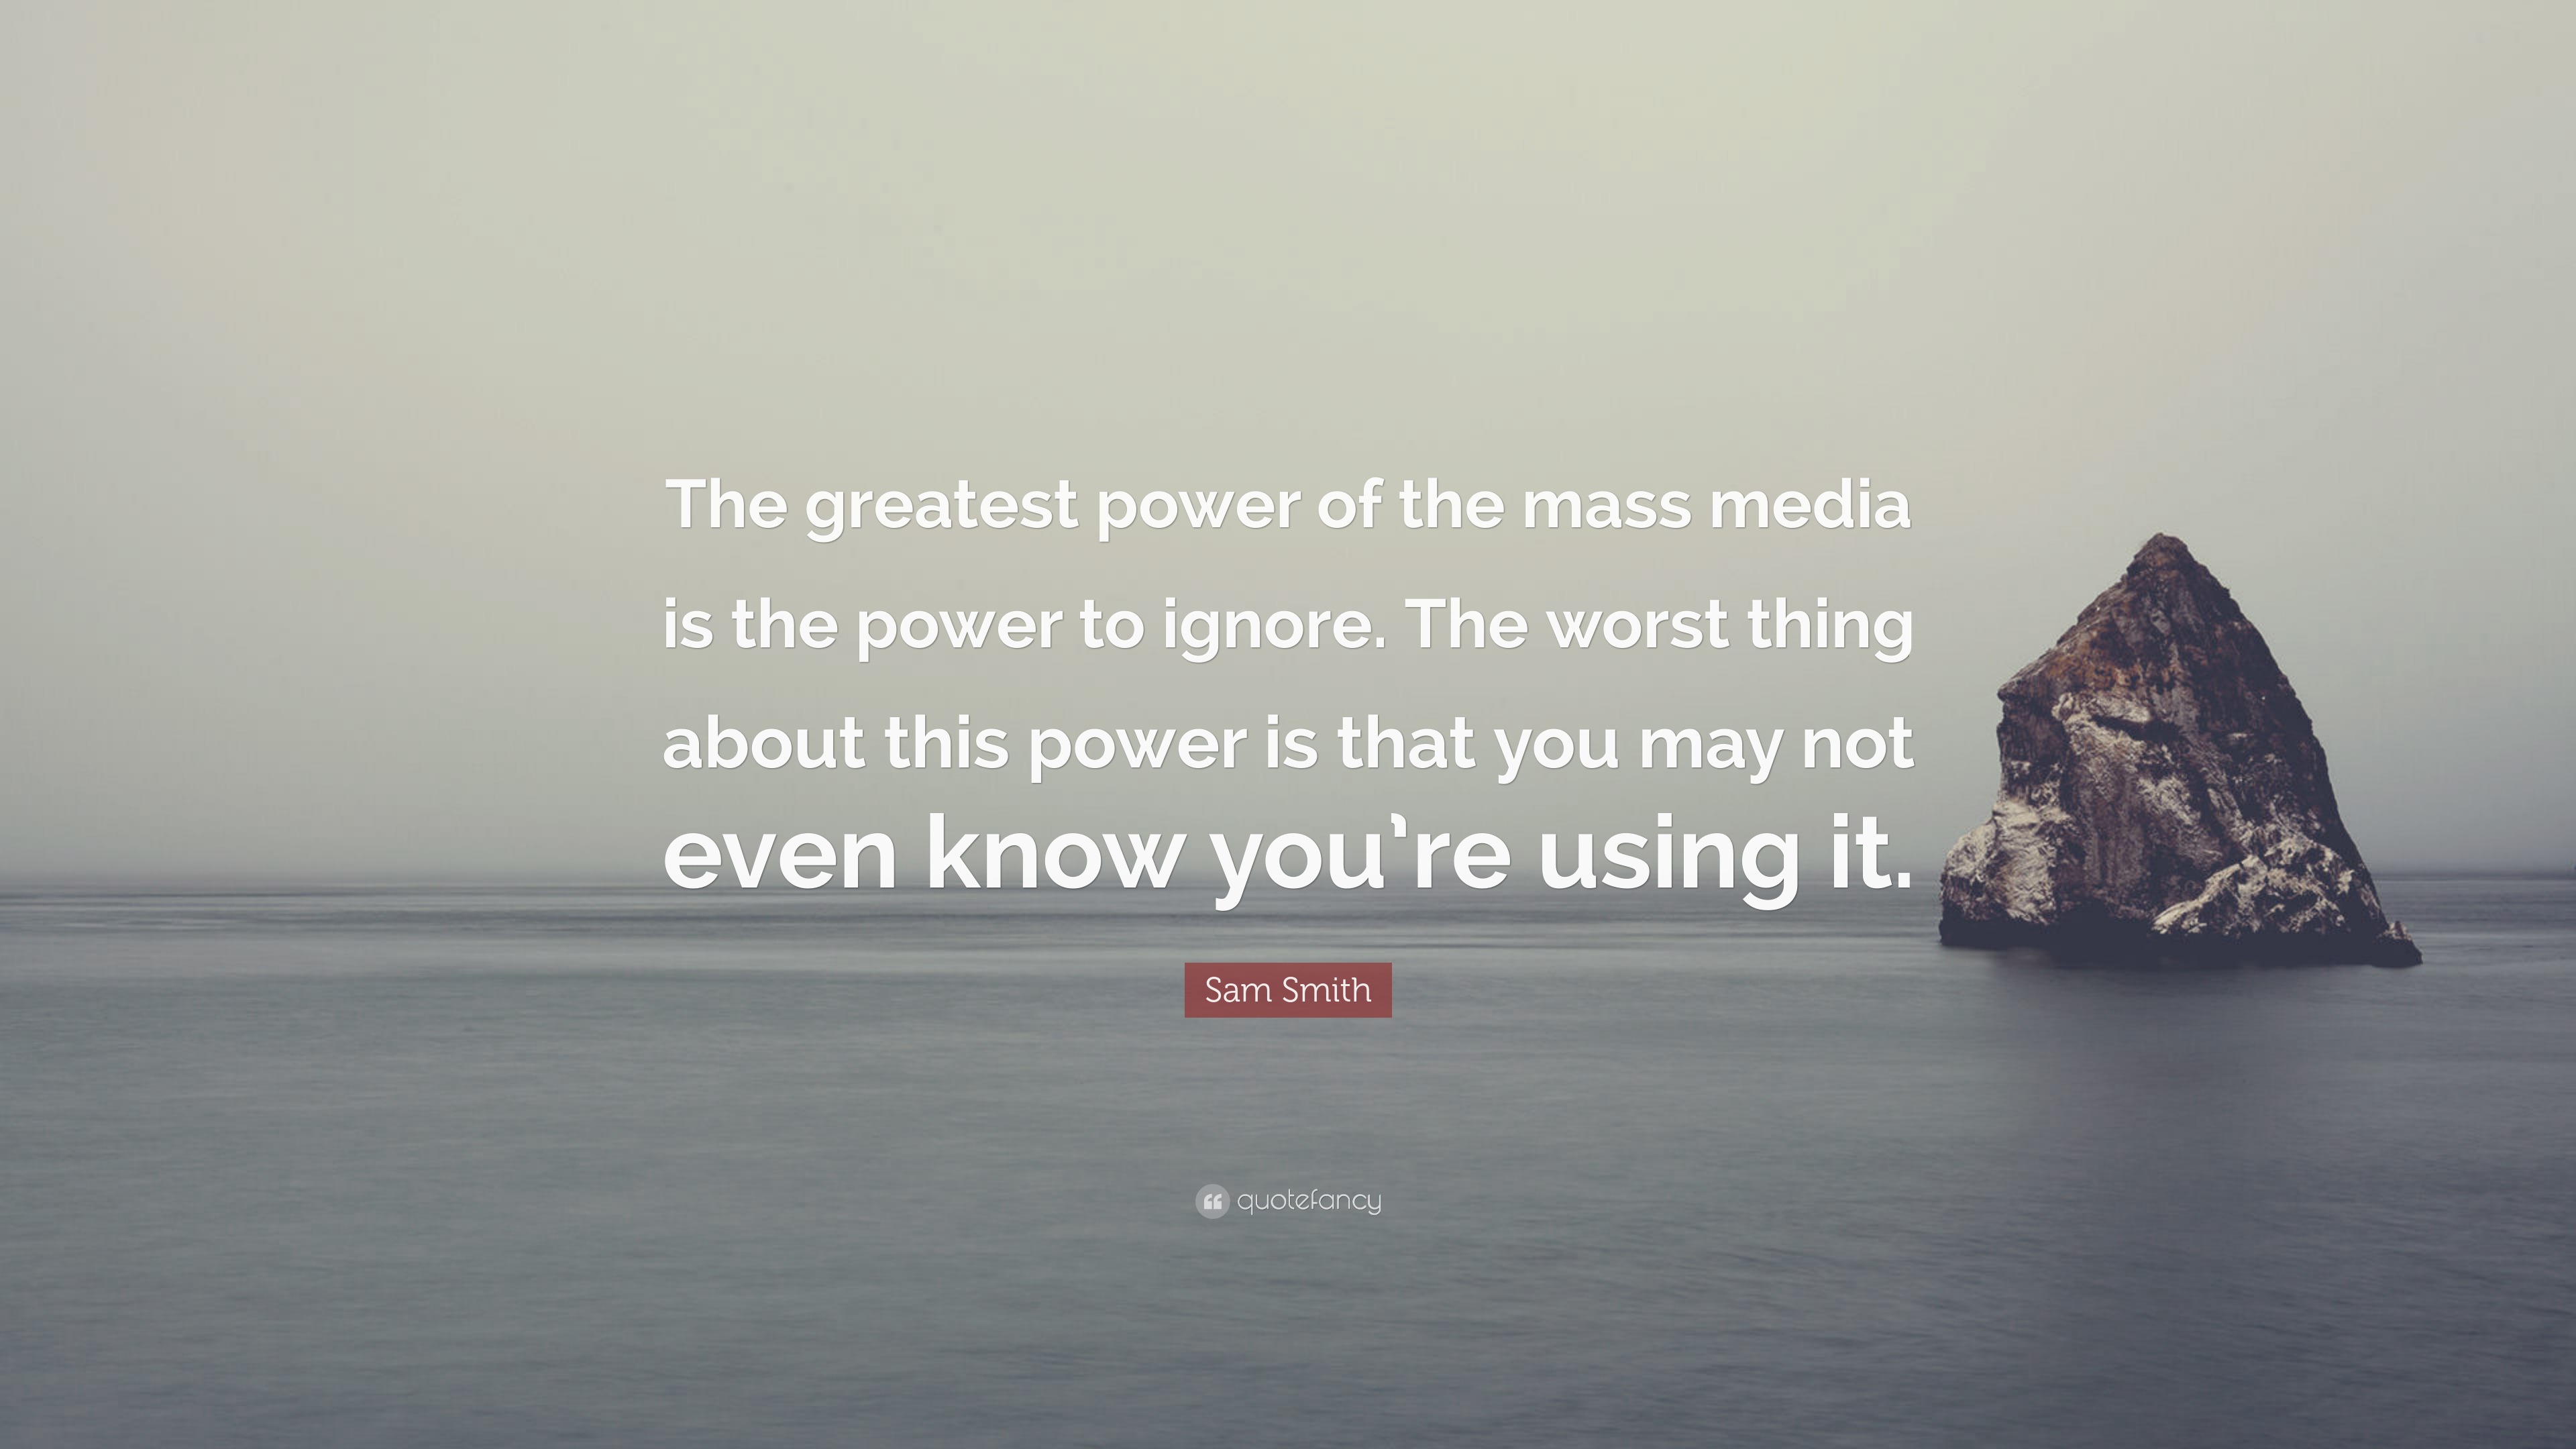 Sam Smith Quote: “The greatest power of the mass media is the power to ...